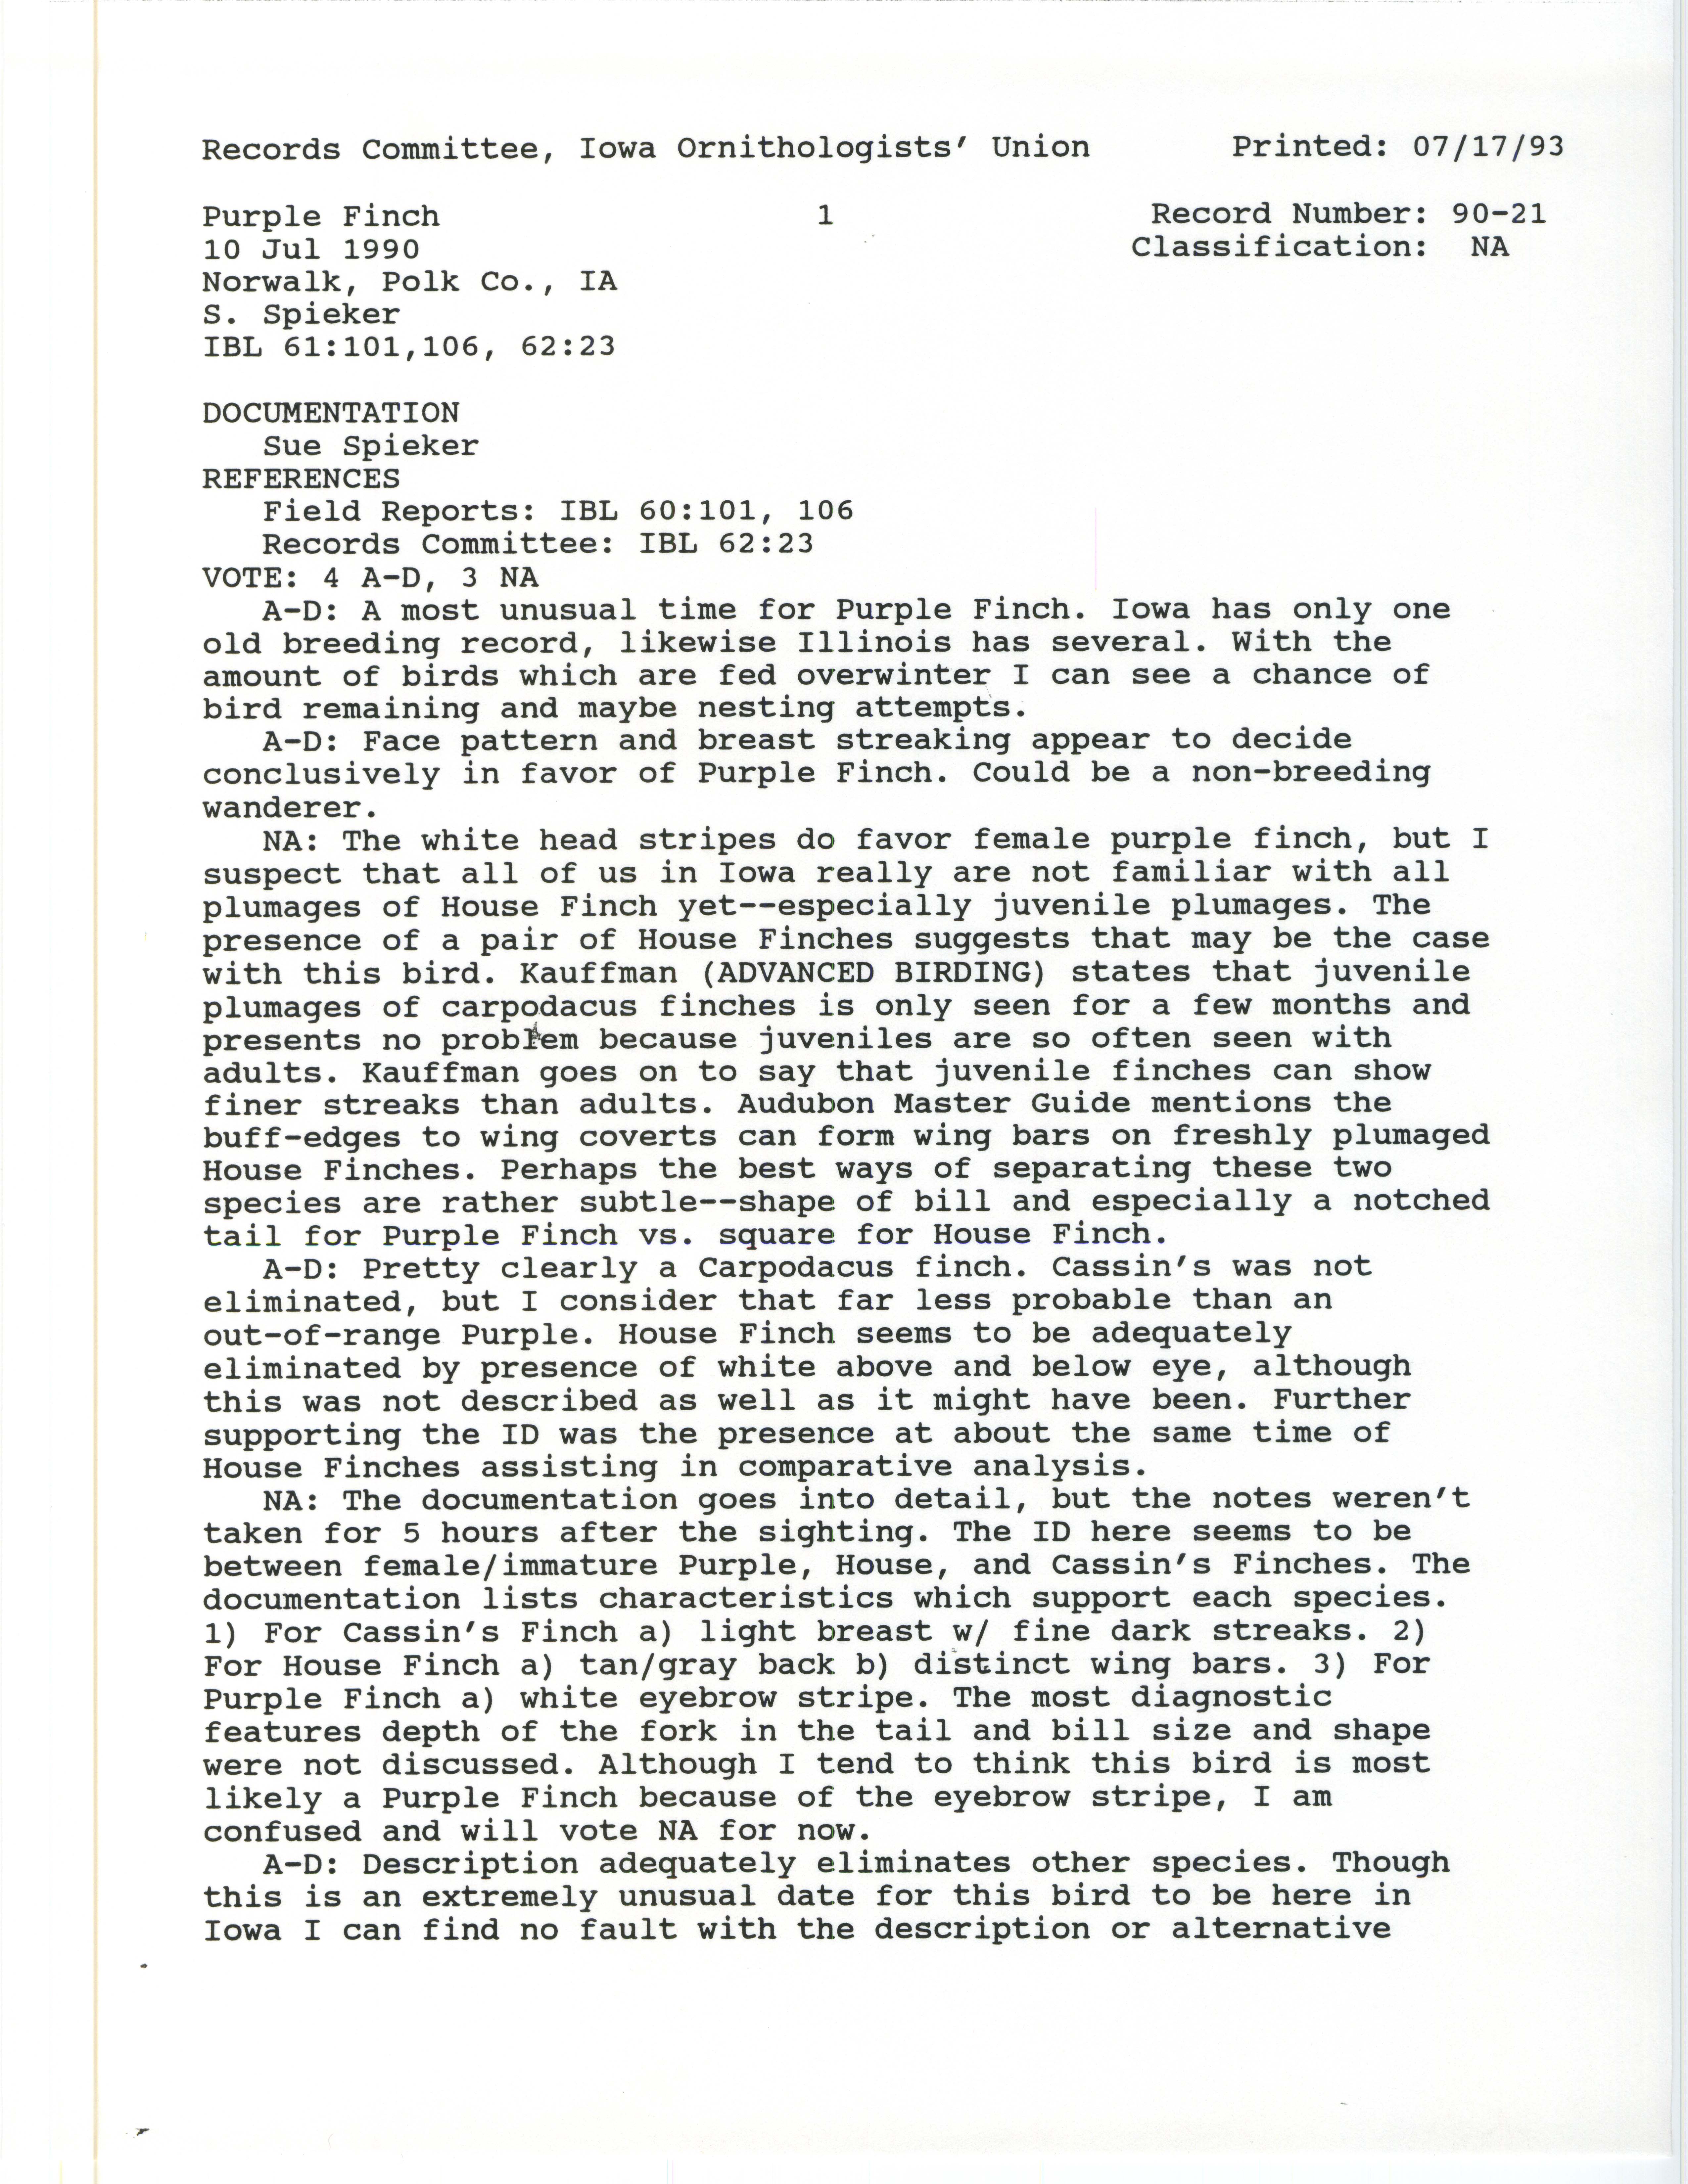 Records Committee review for rare bird sighting for Purple Finch at Iowa City, 1990